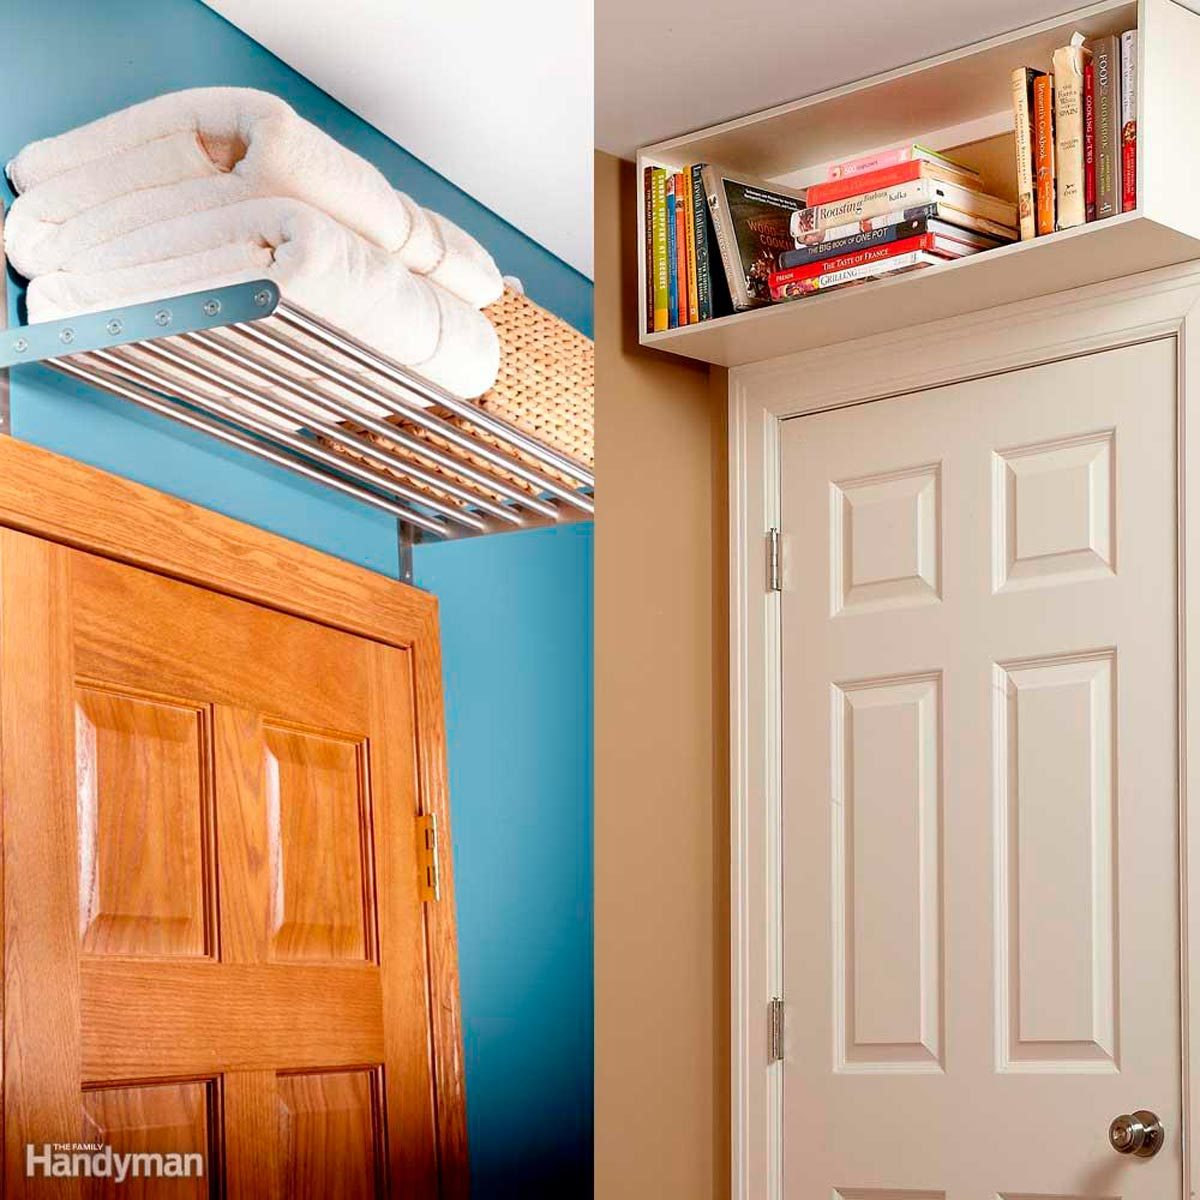 28 Bathroom Towel Storage Ideas That Are Pretty and Practical